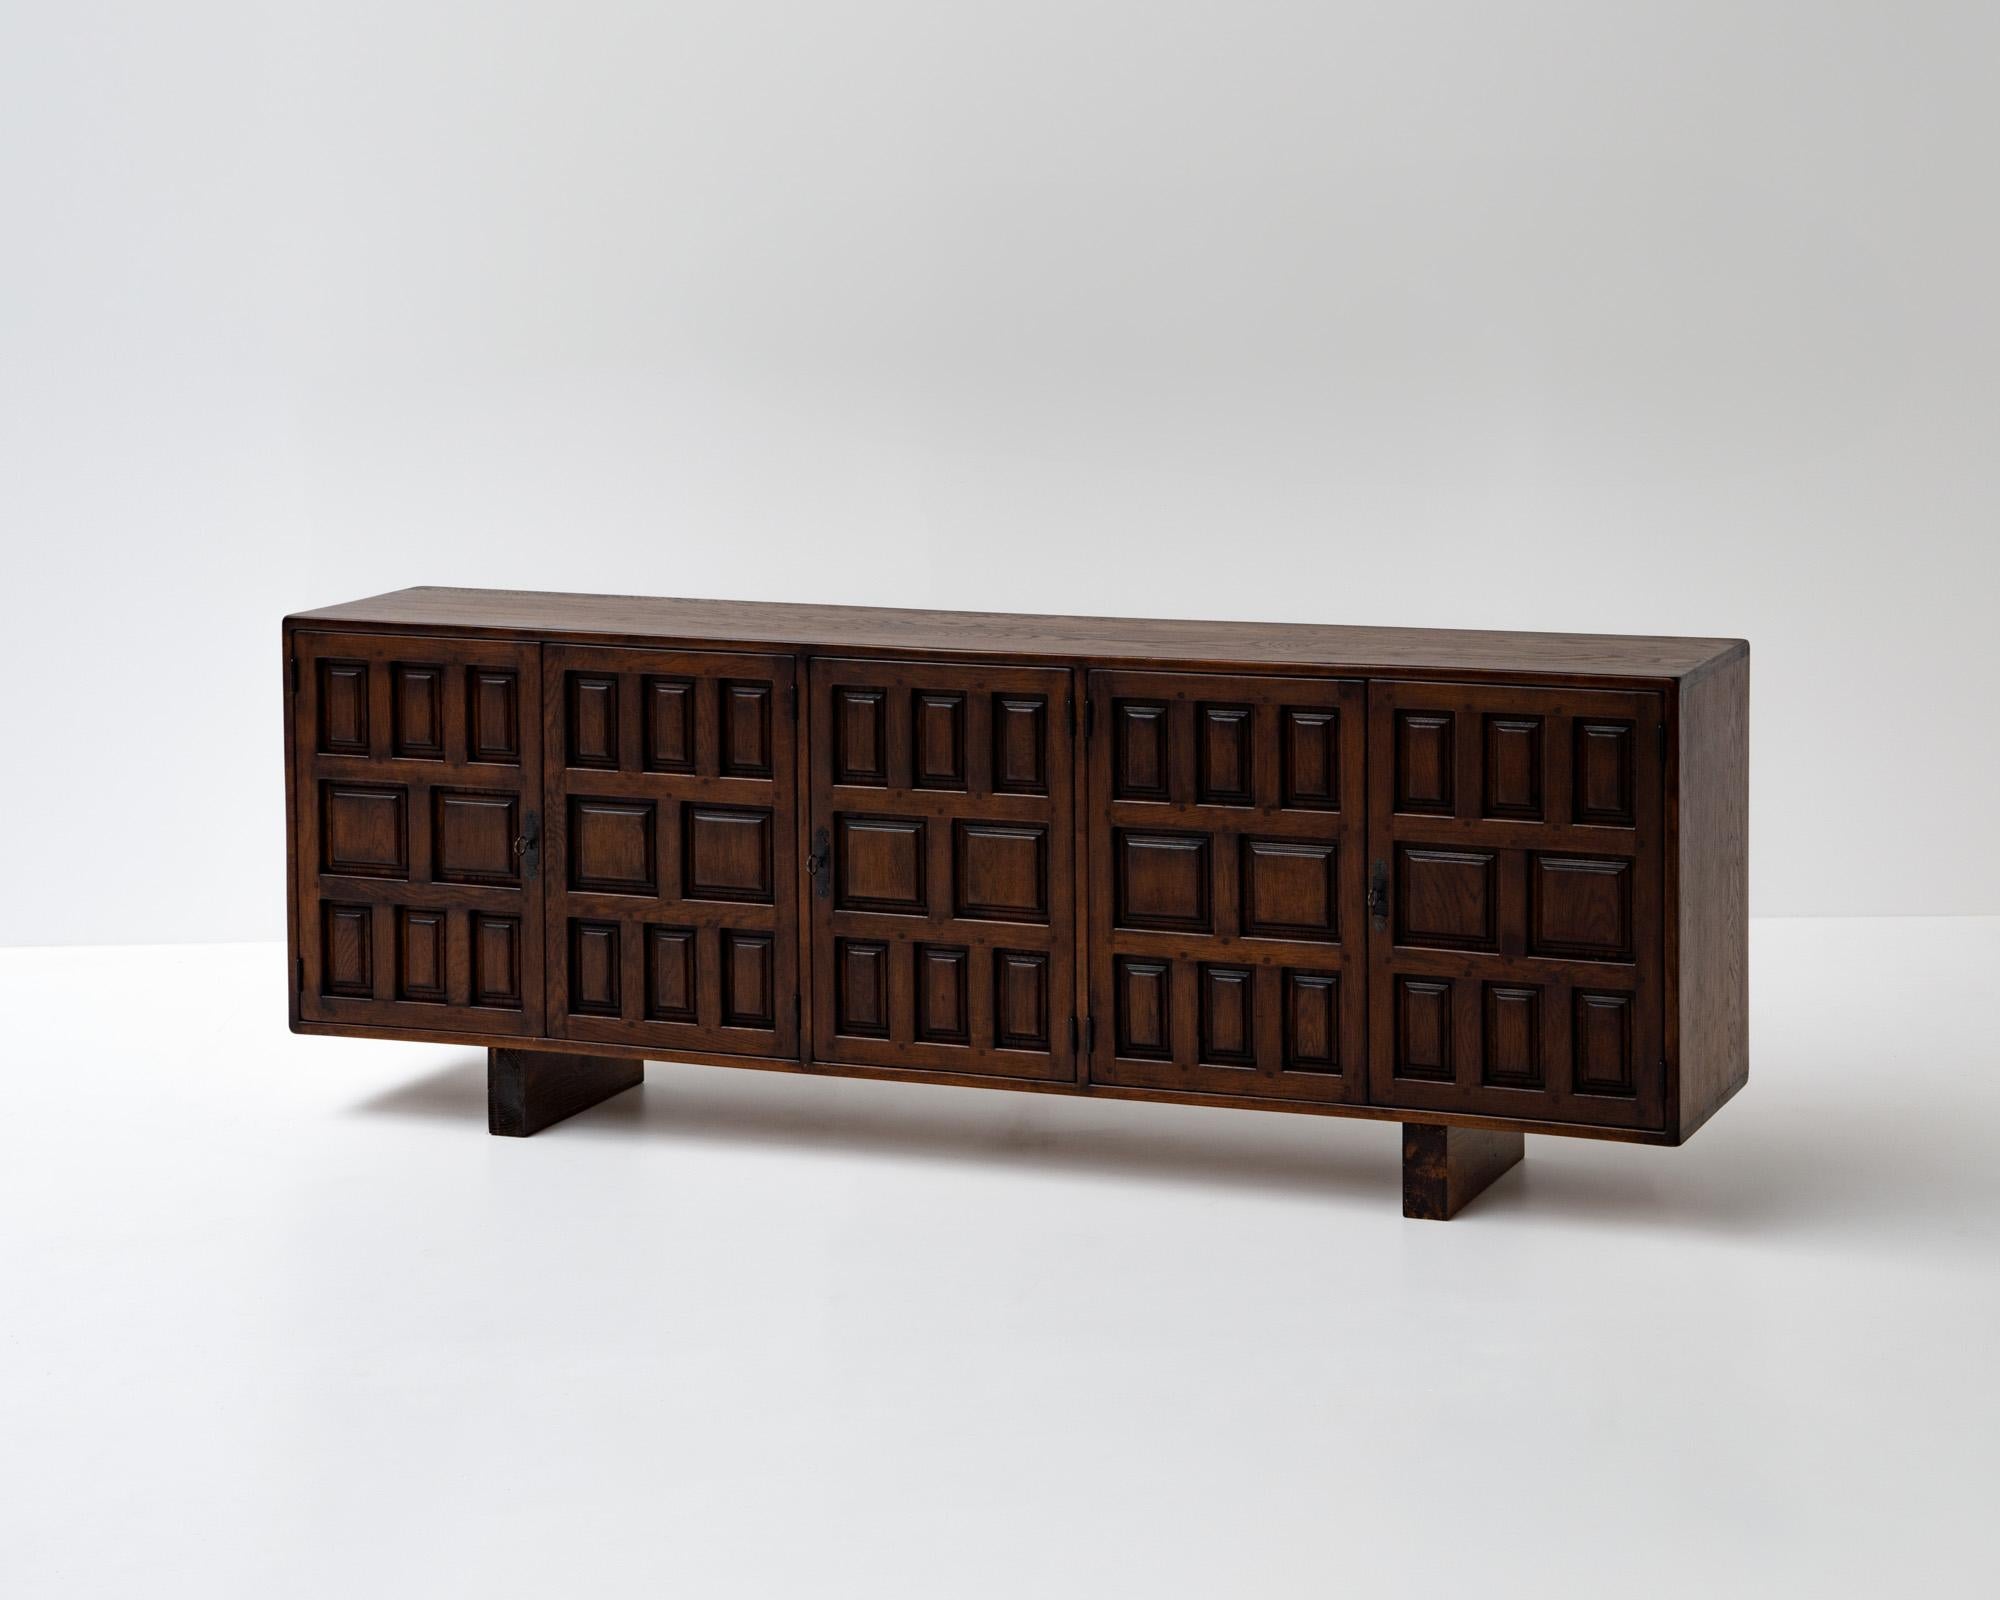 This is an exceptional Spanish brutalist sideboard with intricately carved squares on the door panels. Its dark stained wood finish gives it a sophisticated look that complements various interior styles. 

With a subtle nod to the iconic Biosca